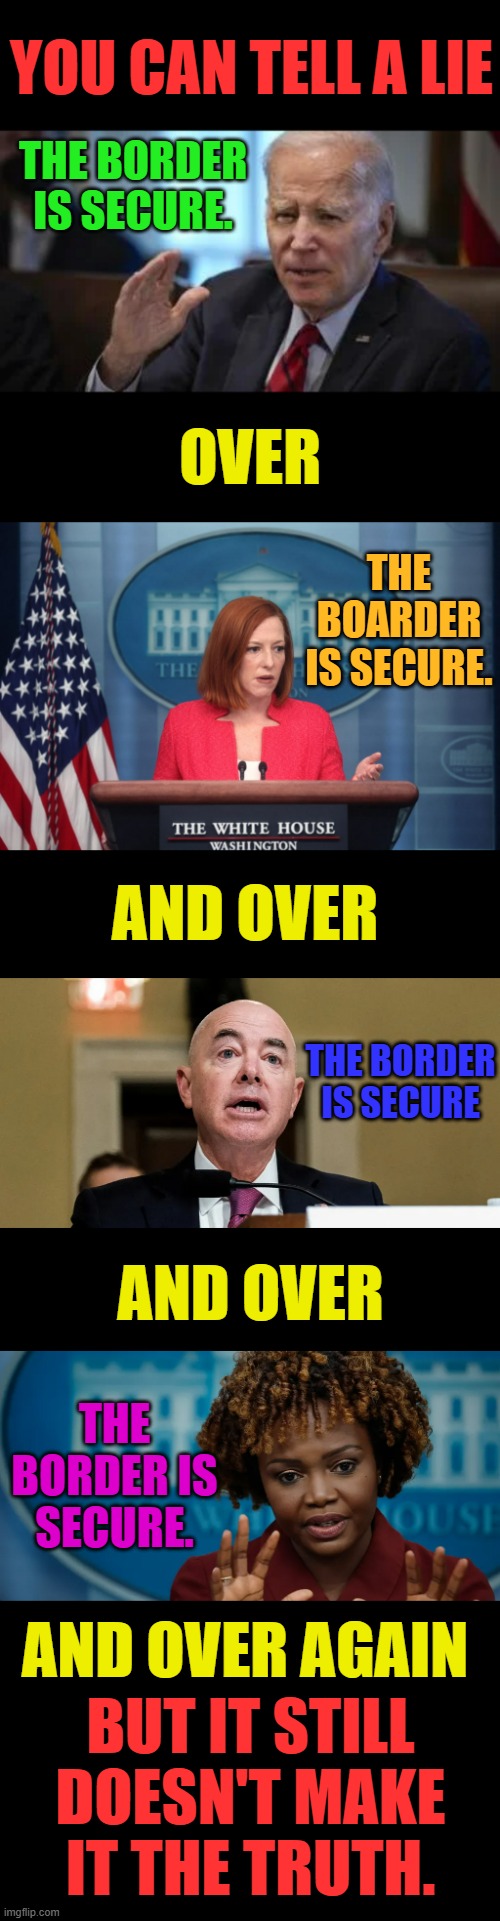 Do They Really Think We're That Dumb? | YOU CAN TELL A LIE; THE BORDER IS SECURE. OVER; THE BOARDER IS SECURE. AND OVER; THE BORDER IS SECURE; AND OVER; THE BORDER IS SECURE. AND OVER AGAIN; BUT IT STILL DOESN'T MAKE IT THE TRUTH. | image tagged in memes,politics,joe biden,admin,lies,short satisfaction vs truth | made w/ Imgflip meme maker